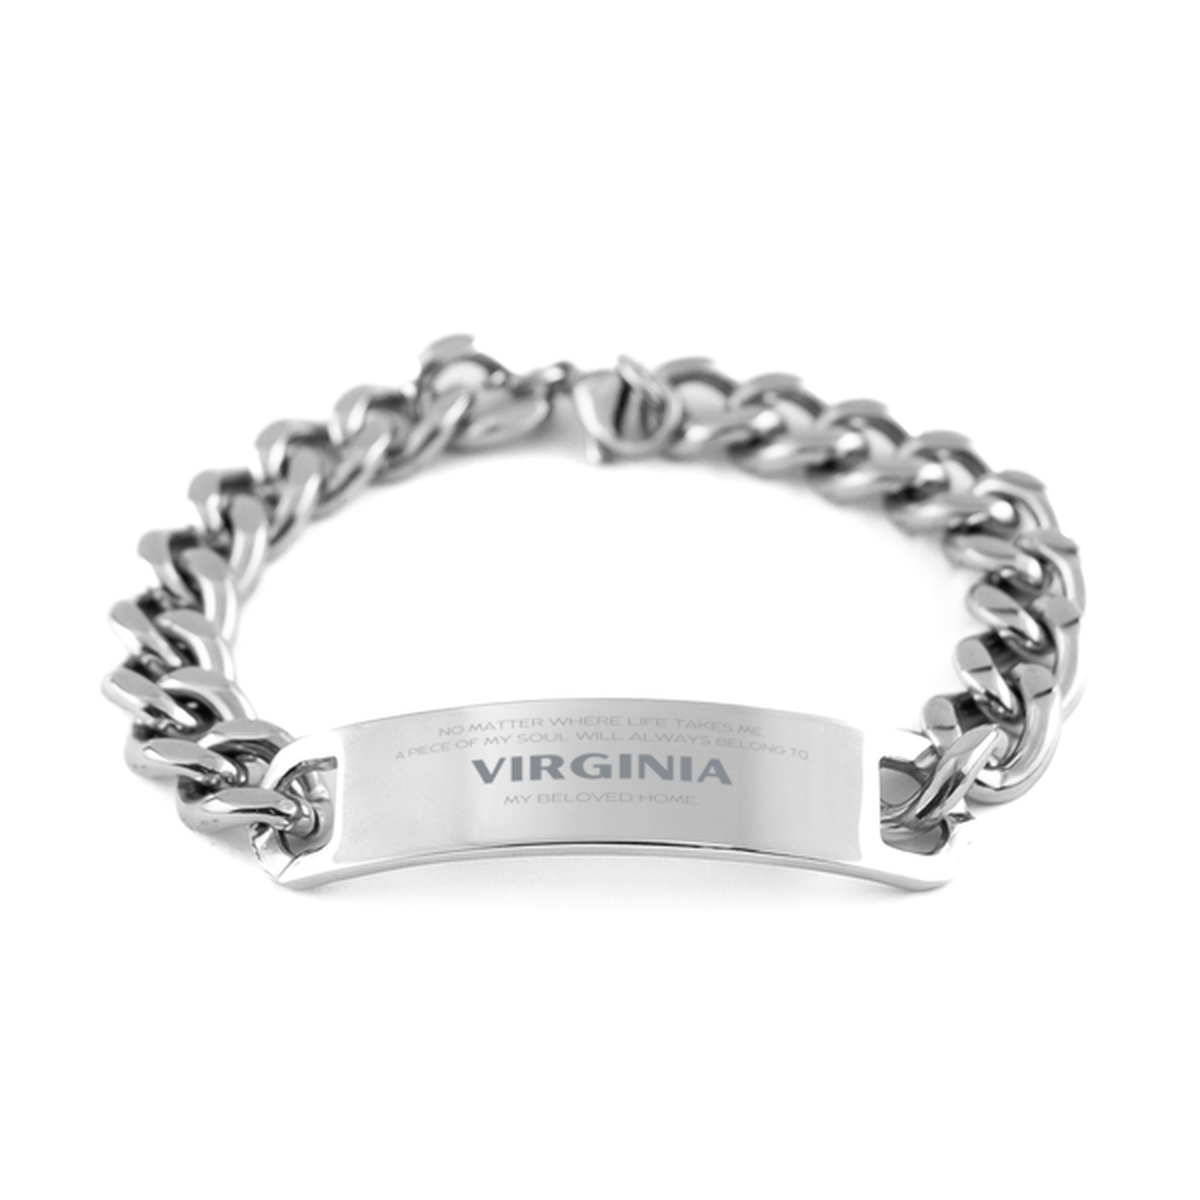 Love Virginia State Gifts, My soul will always belong to Virginia, Proud Cuban Chain Stainless Steel Bracelet, Birthday Unique Gifts For Virginia Men, Women, Friends